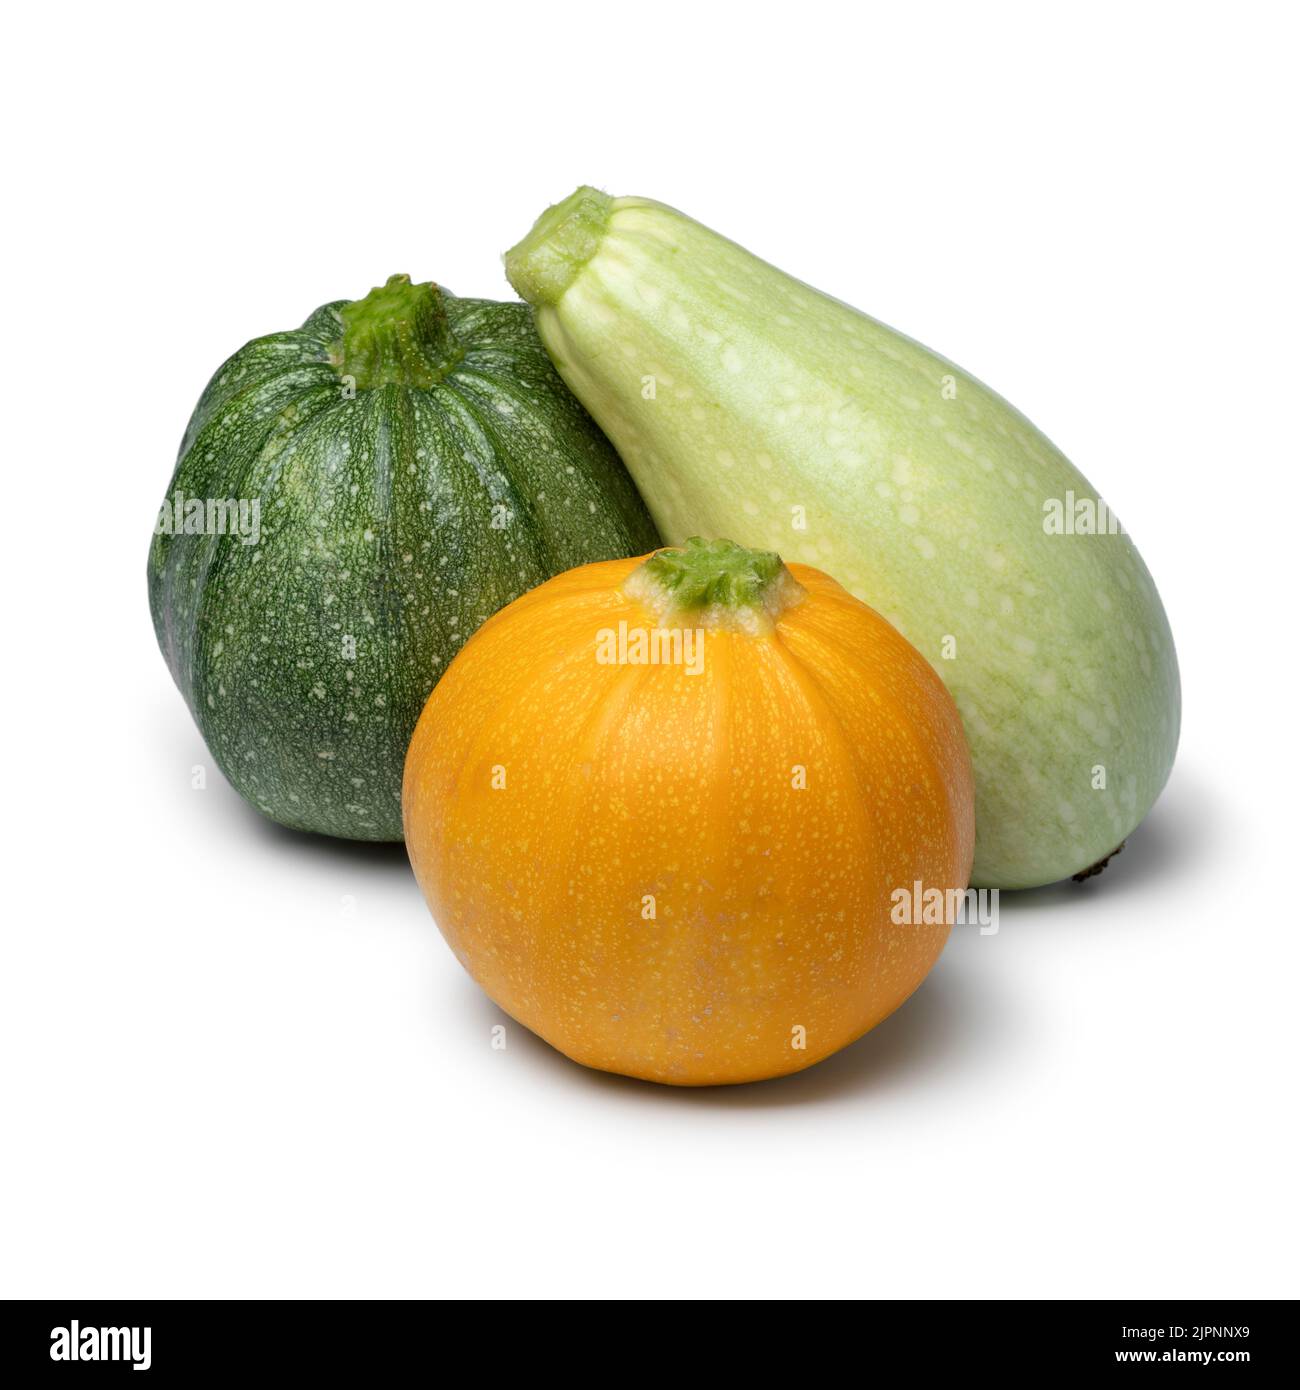 Variation of fresh homegrown zucchini close up isolated on white background Stock Photo